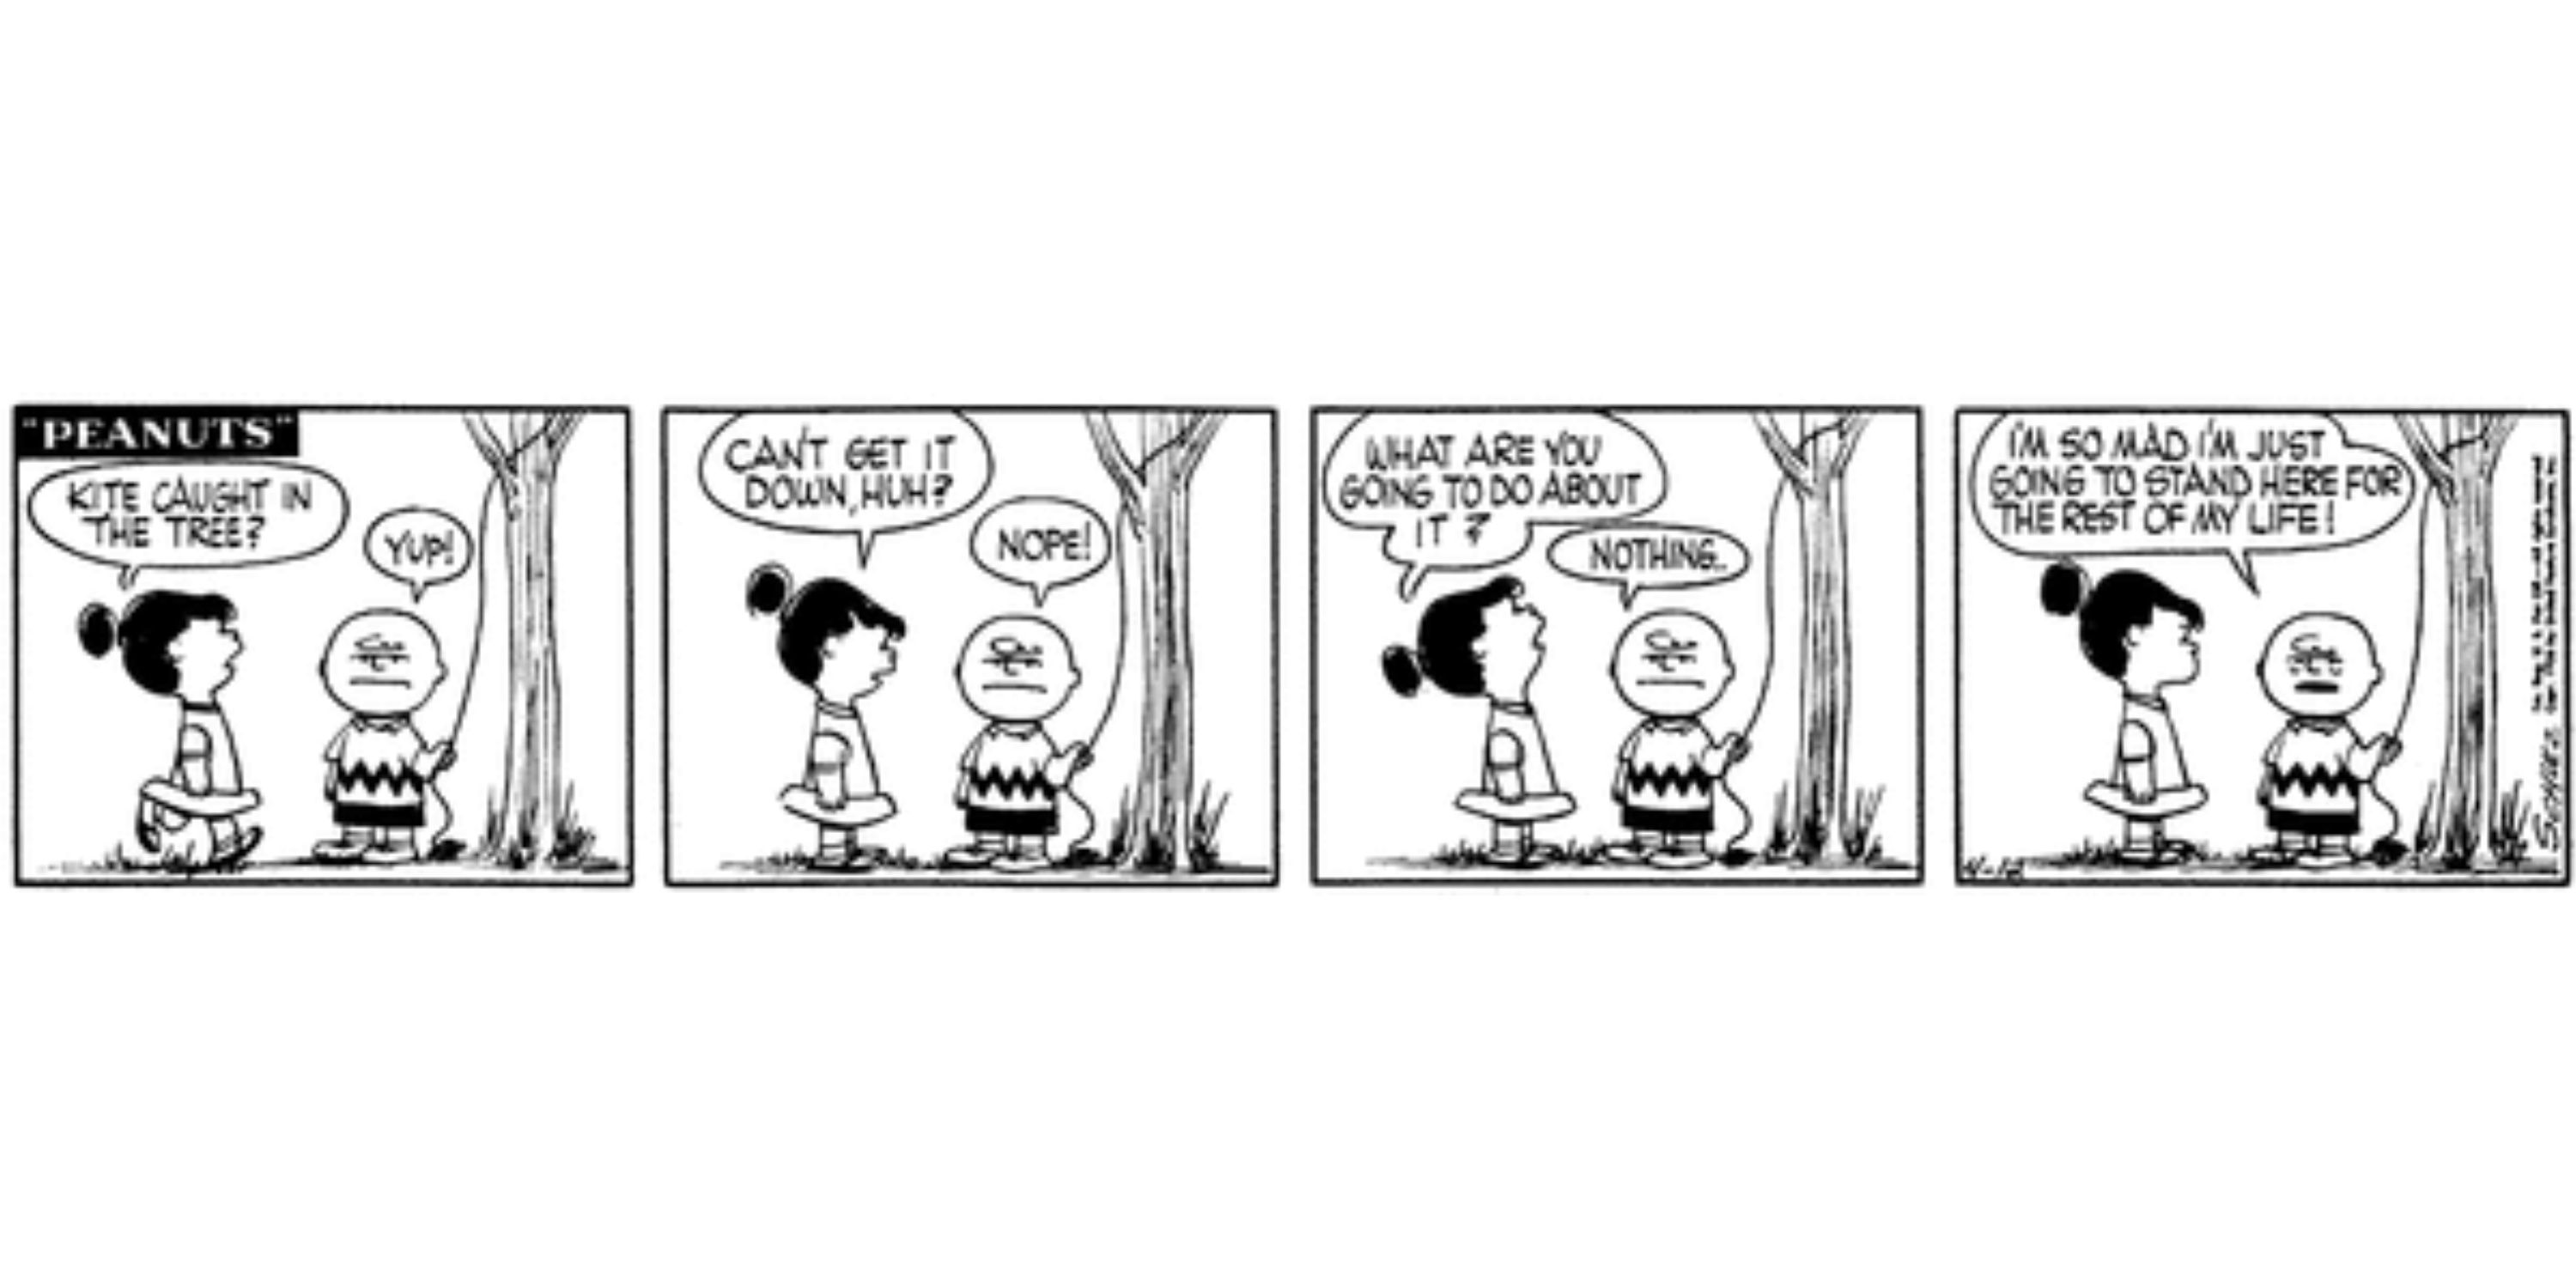 Lucy and Charlie Brown with the kite eating tree in Peanuts.